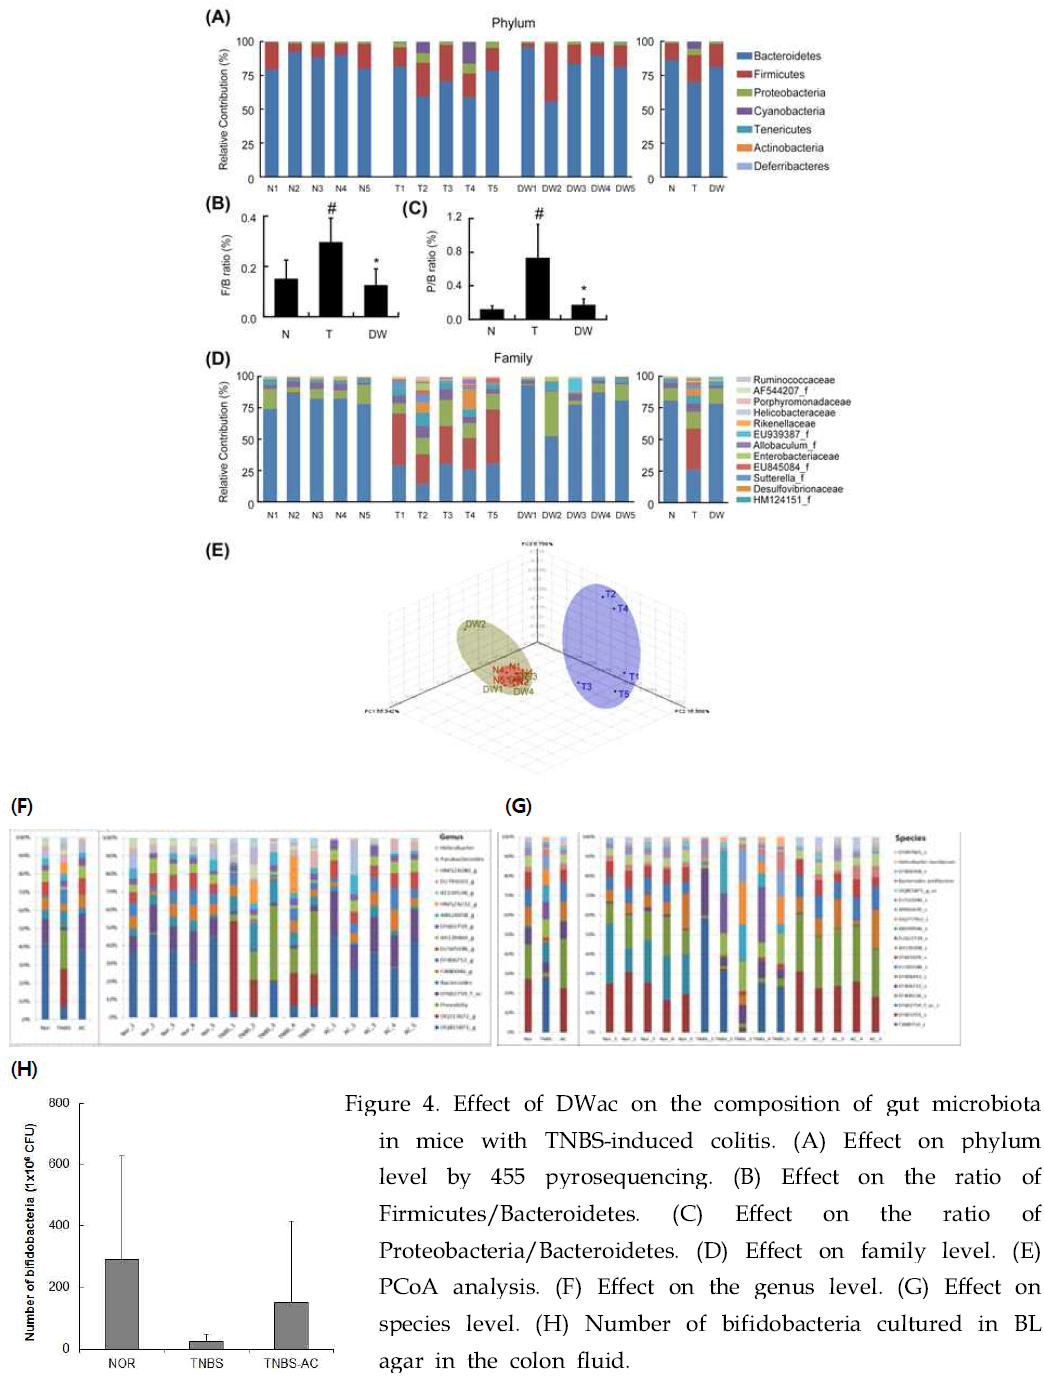 Effect of DWac on the composition of gut microbiota in mice with TNBS-induced colitis.